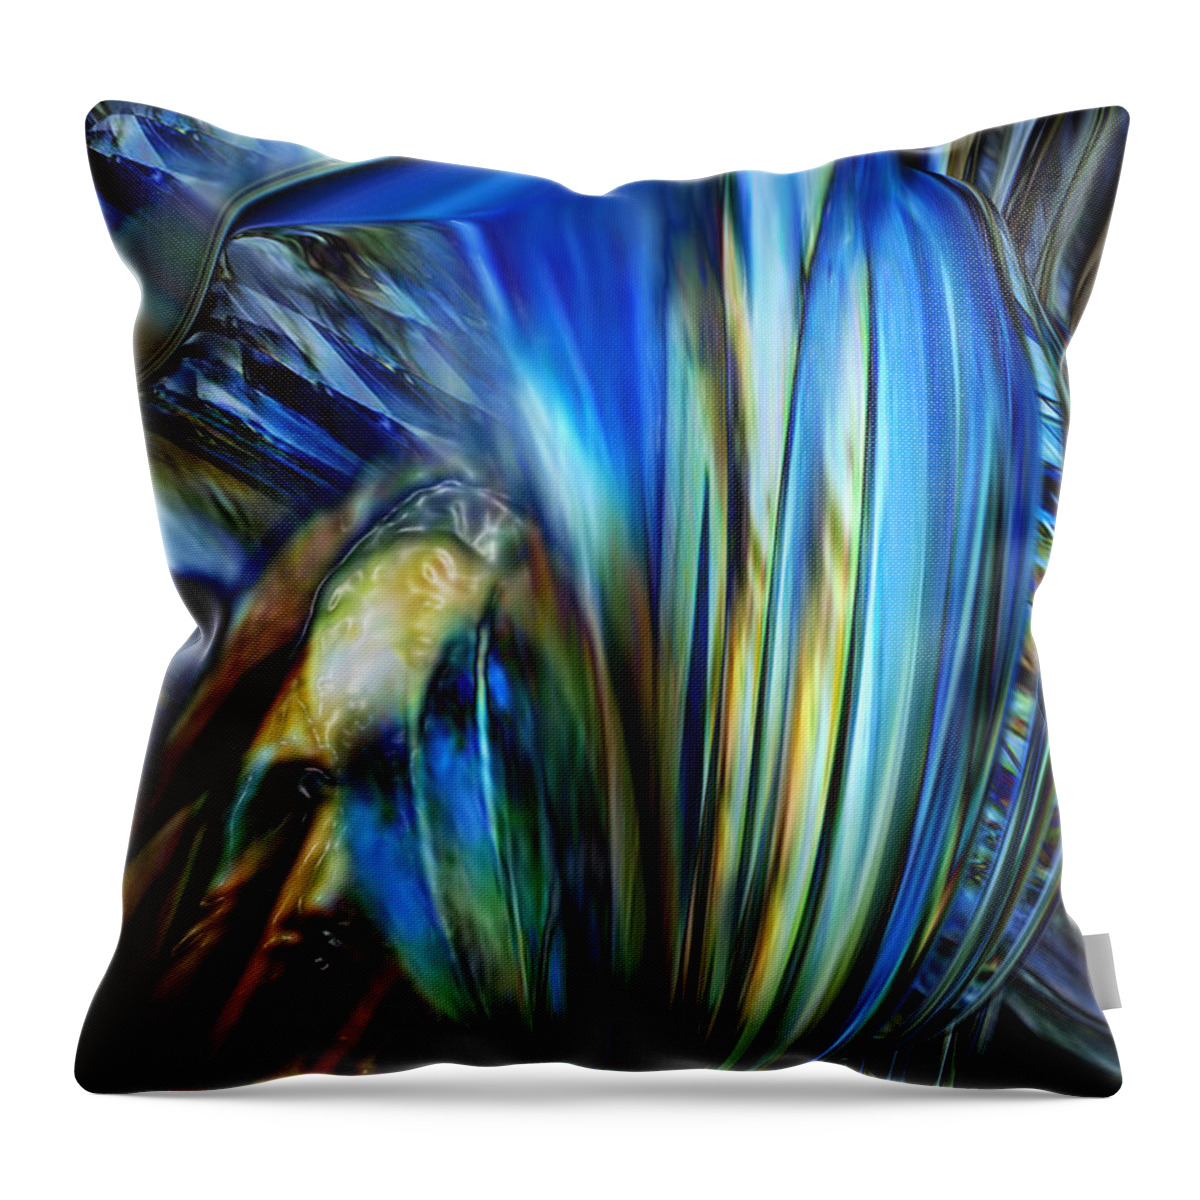 Wealth Weary Throw Pillow featuring the digital art Wealth Weary by Steve Sperry